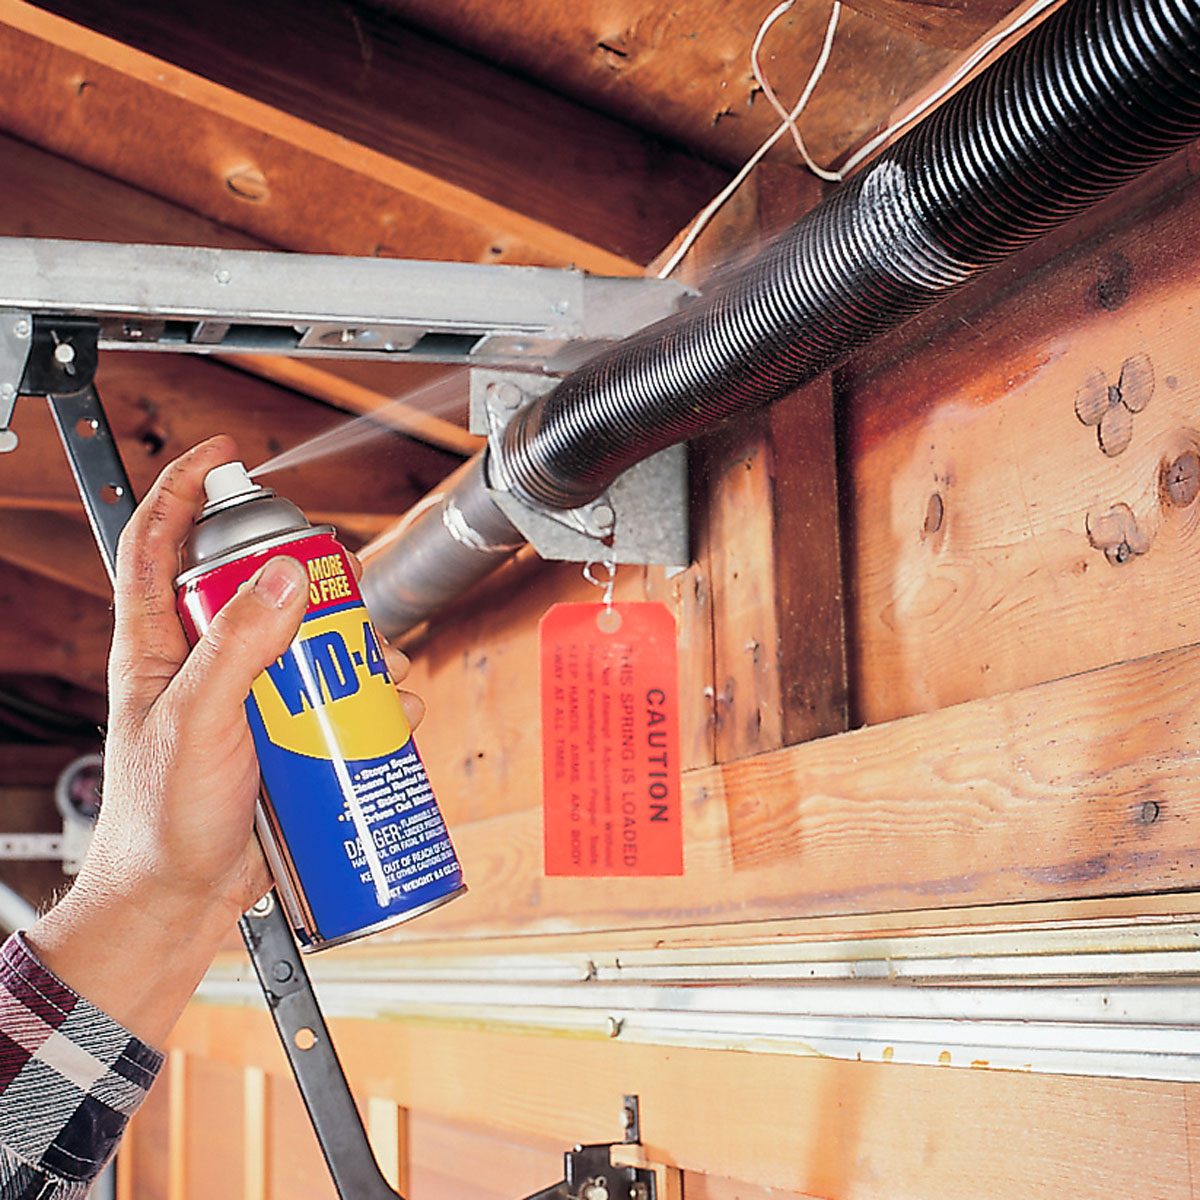 How To Lubricate Garage Door: Step-By-Step Guide & Tips